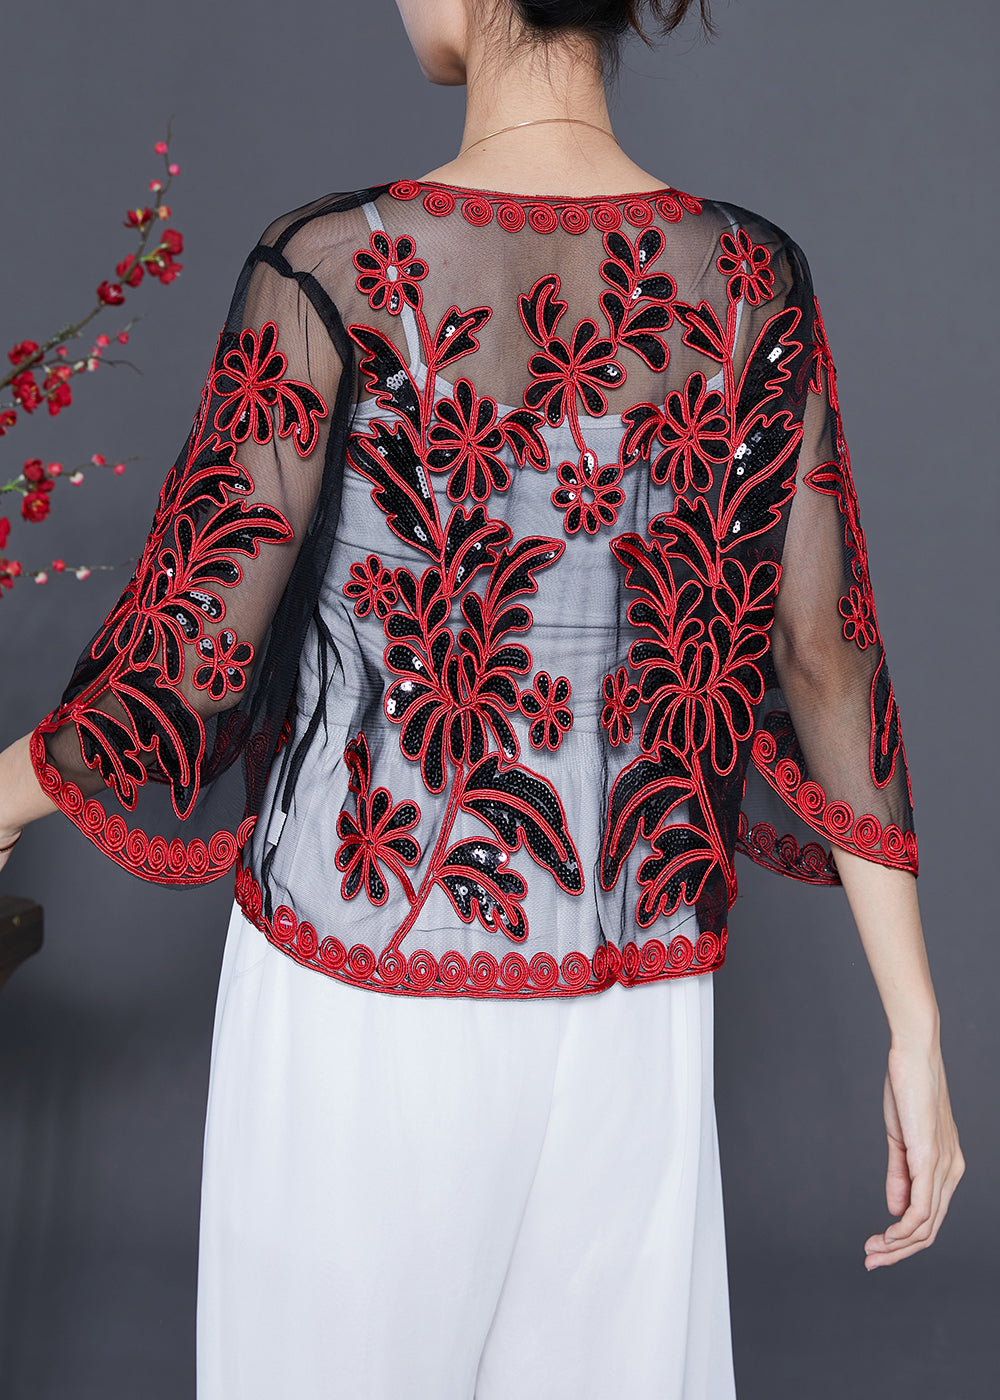 French Red Sequins Embroideried Tulle Loose Cardigan Summer LY5540 - fabuloryshop